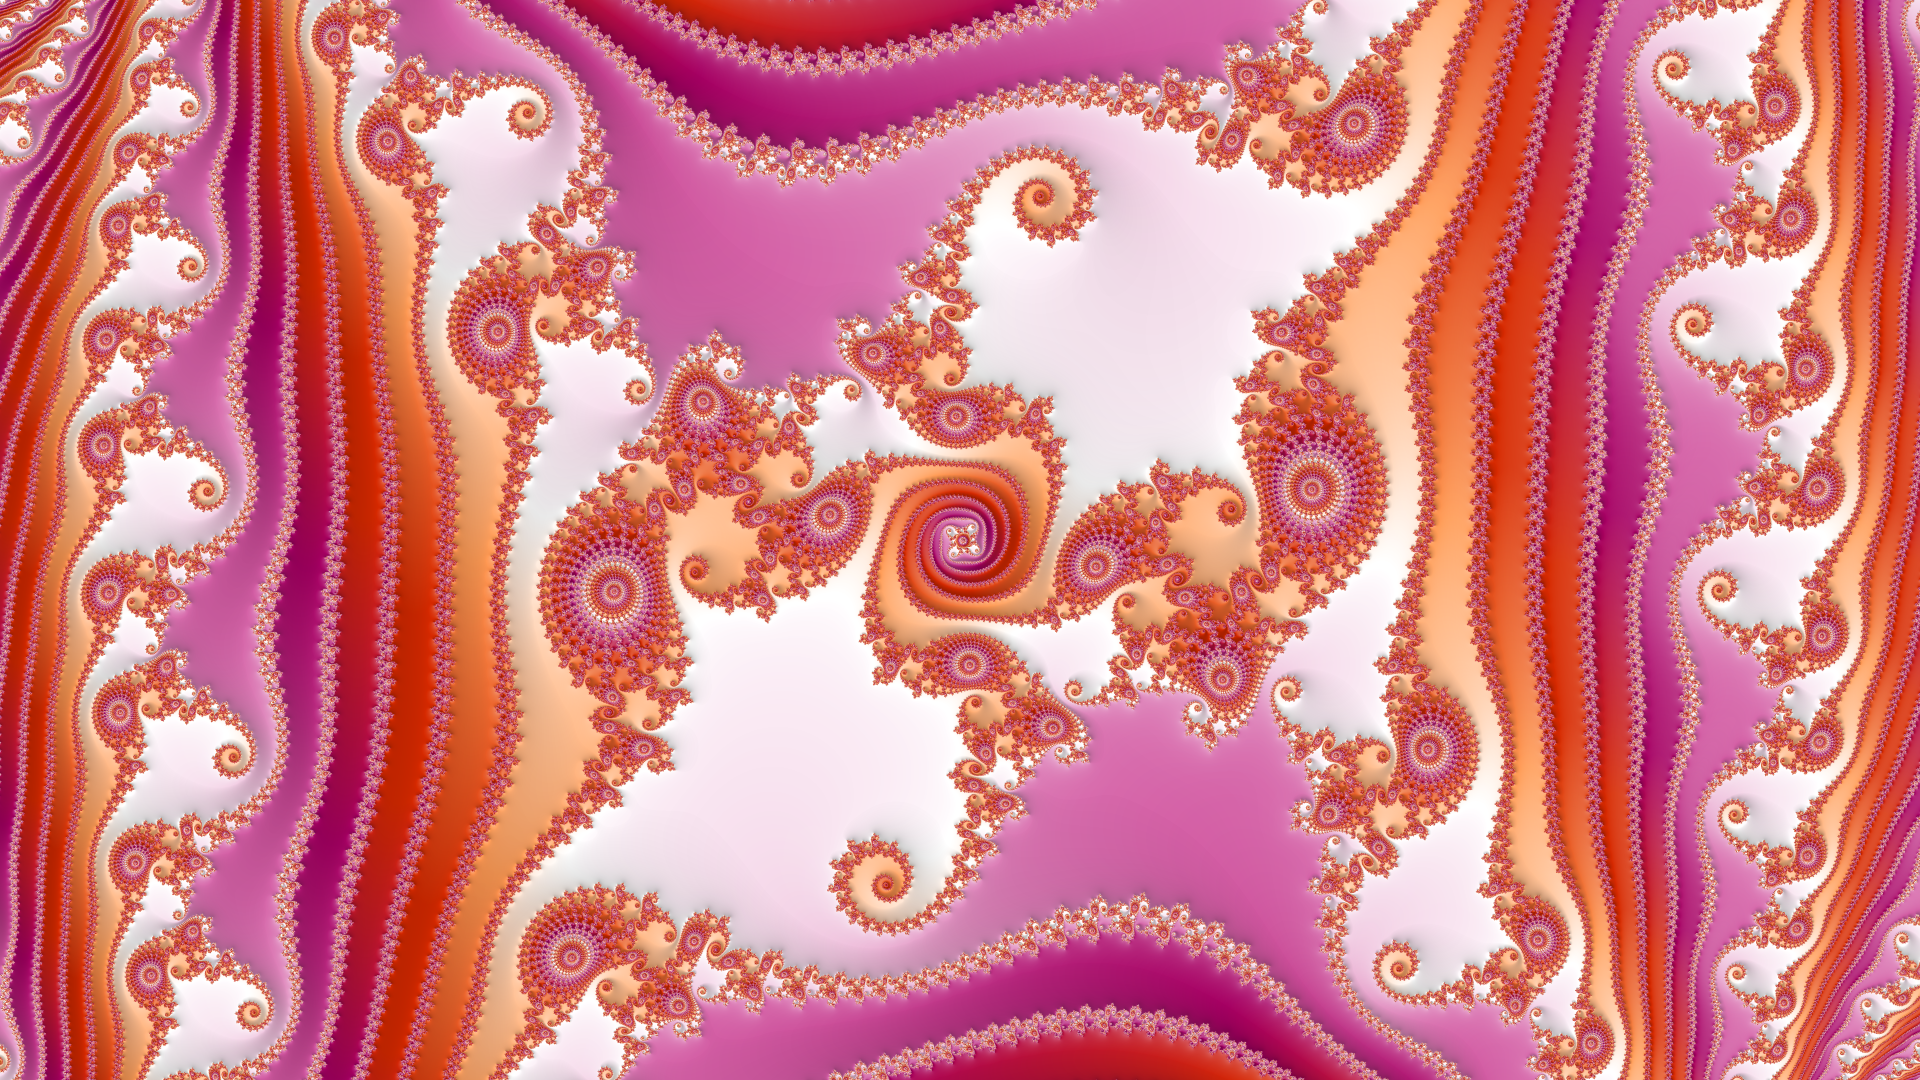 a mandelbrot fractal render with the colors of the lesbian pride flag